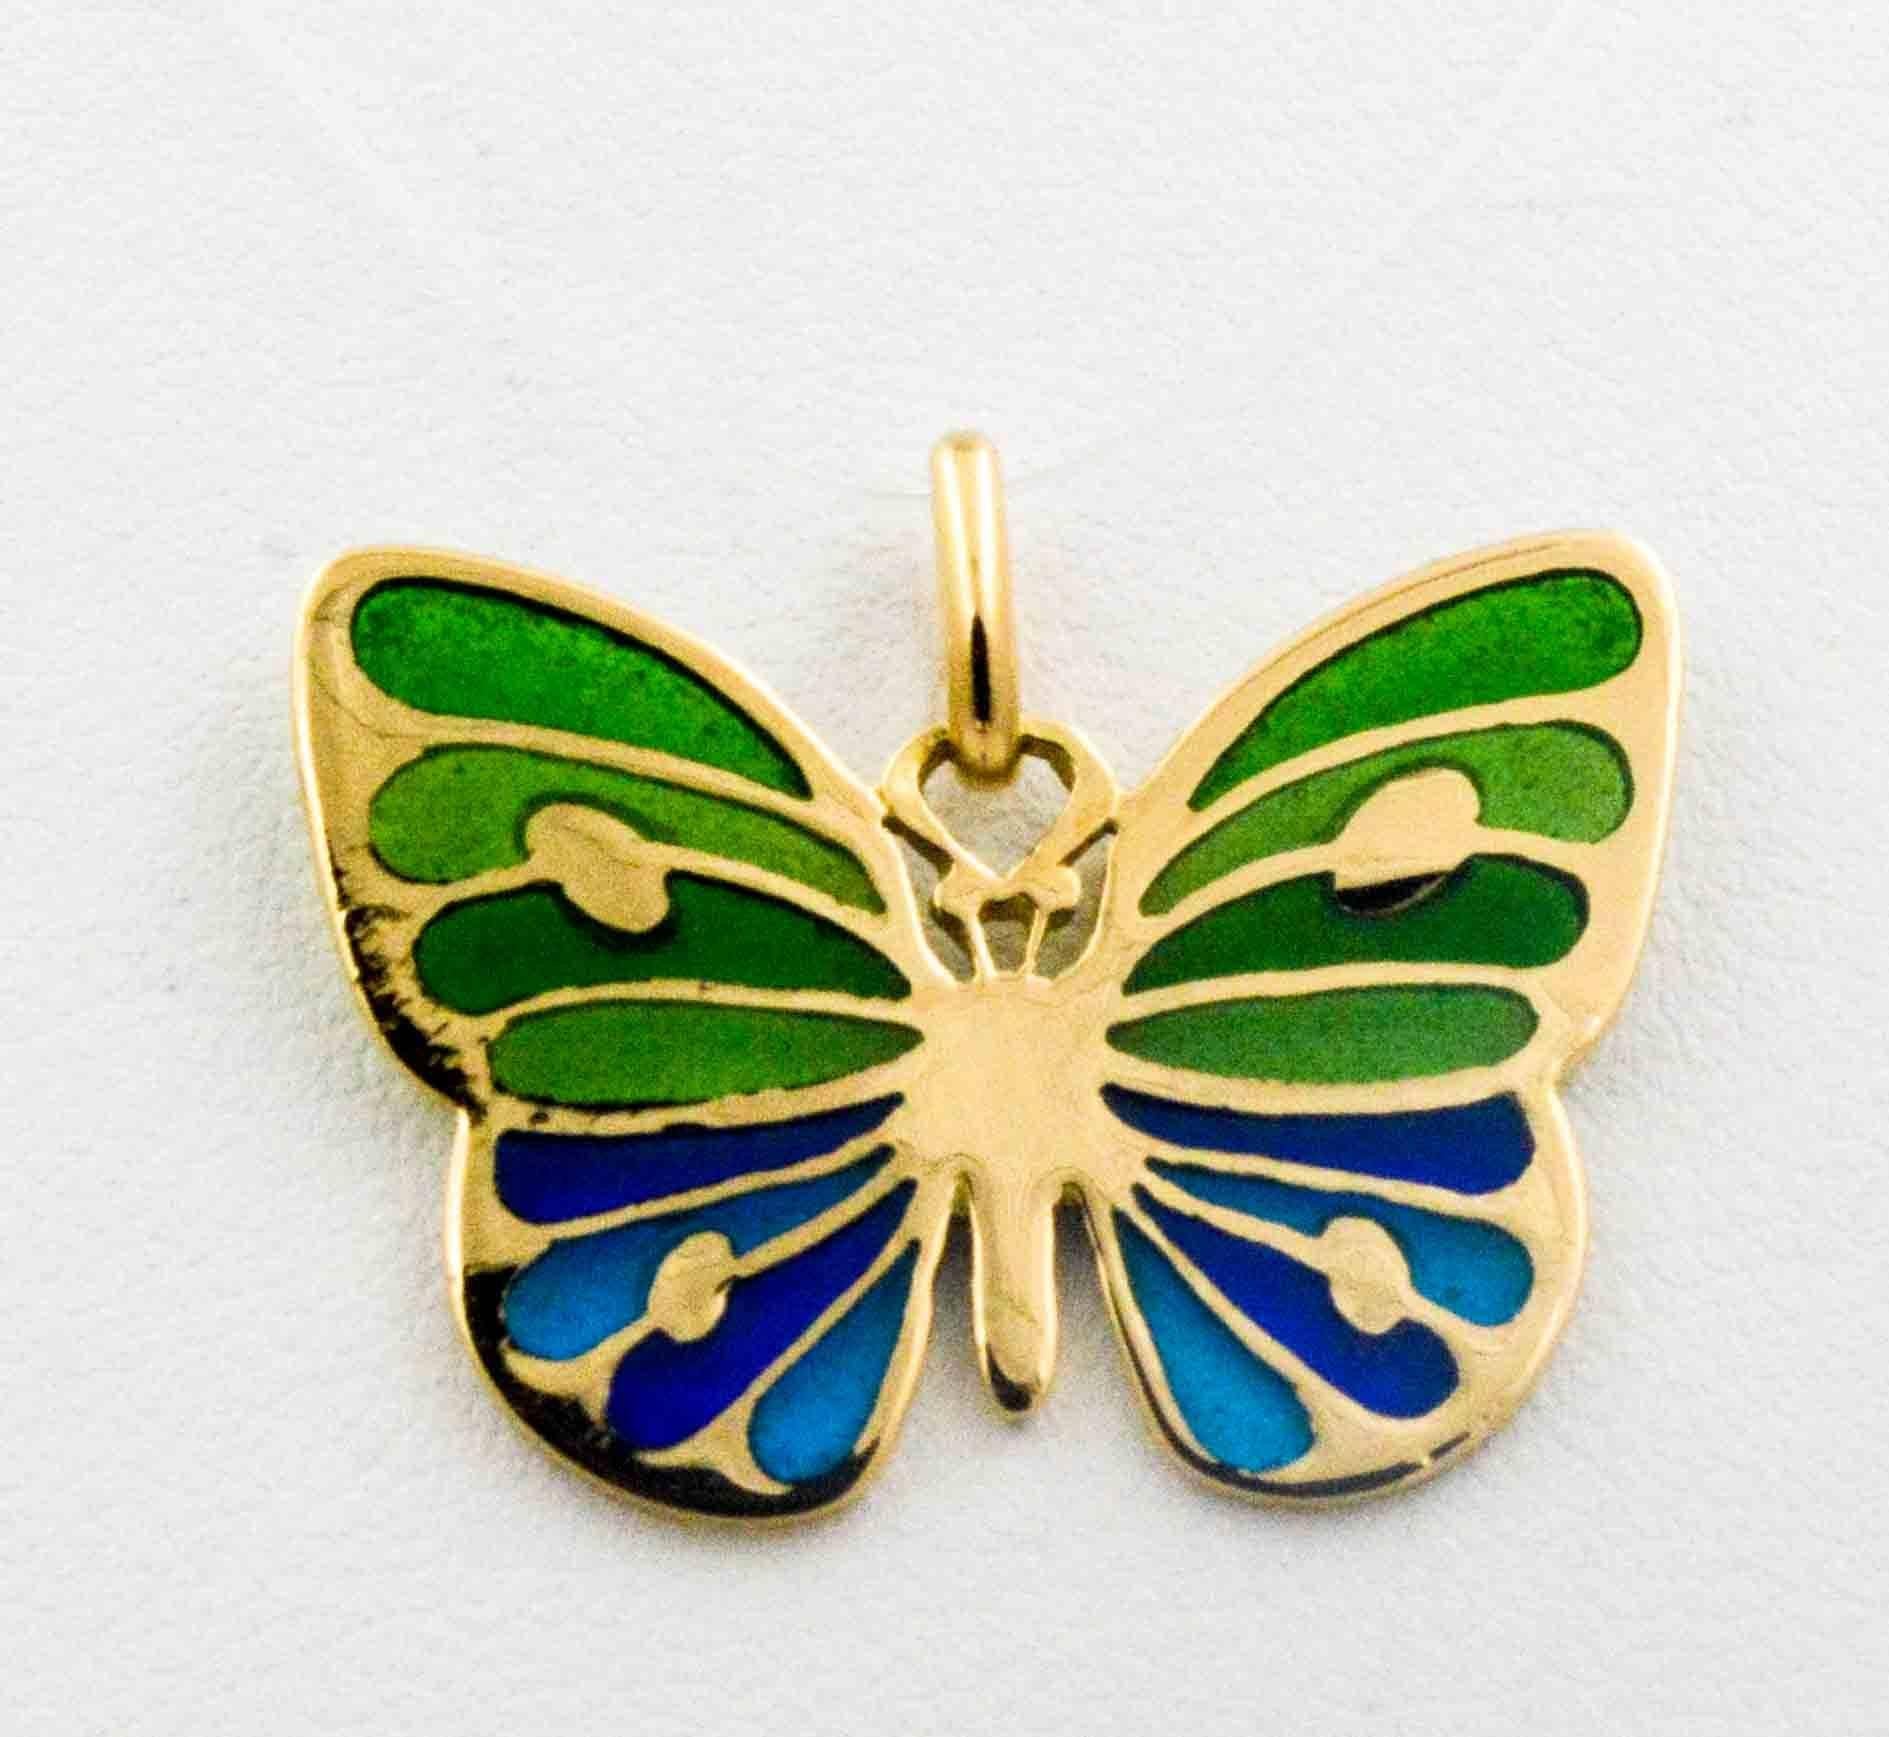 This charming little glass enameled butterfly, in hues of soft blues and greens, is hand crafted in the Plique a Jour art. 18 karat yellow gold accents the body and wings of this captivating delicate little butterfly. 